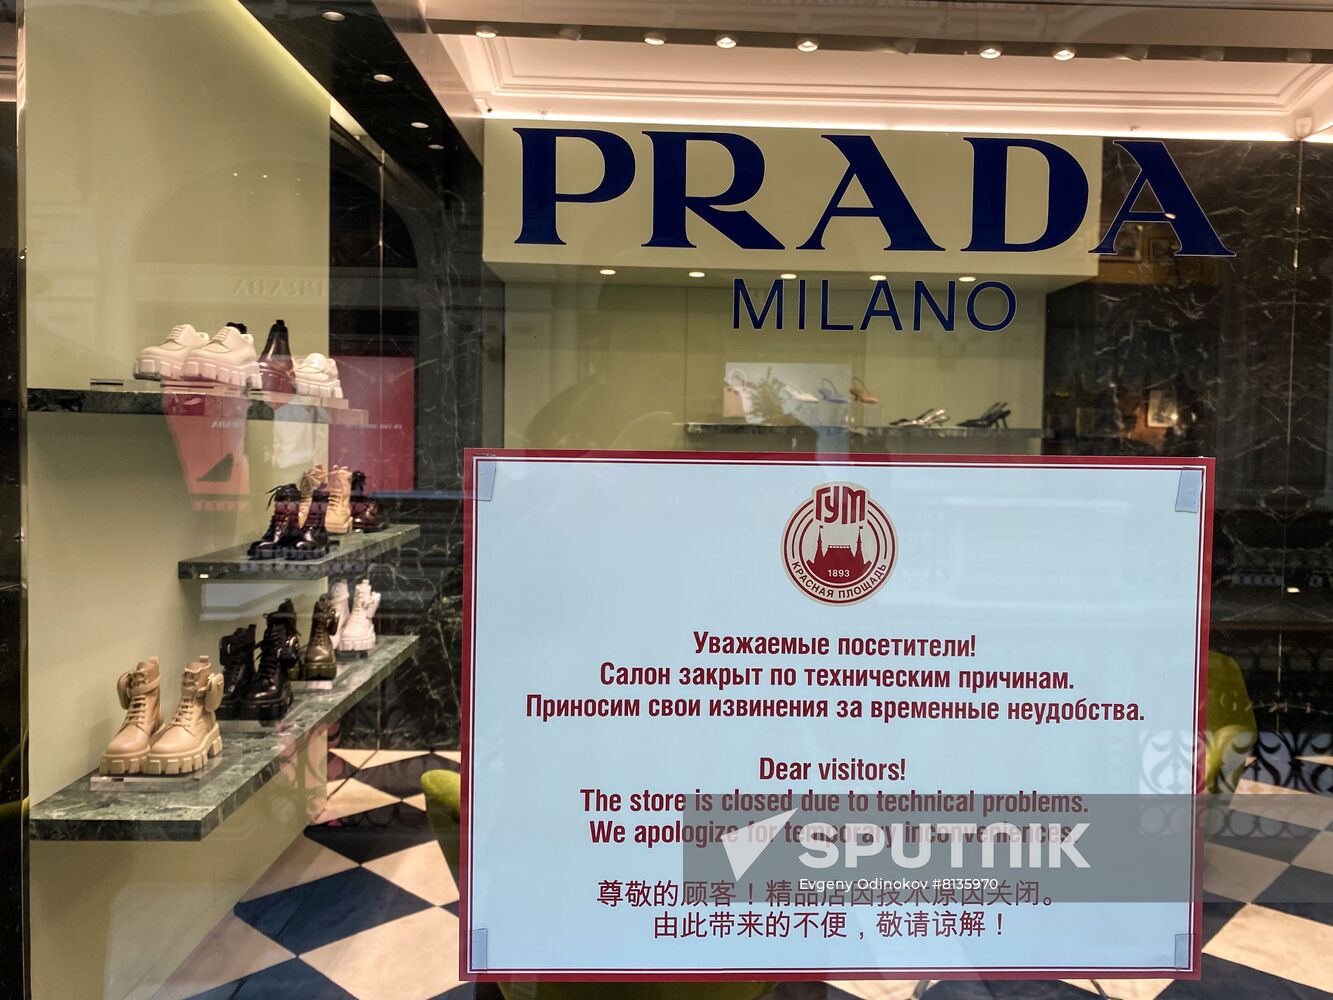 Chanel, Prada, and Other Luxury Brands Suspend Business in Russia